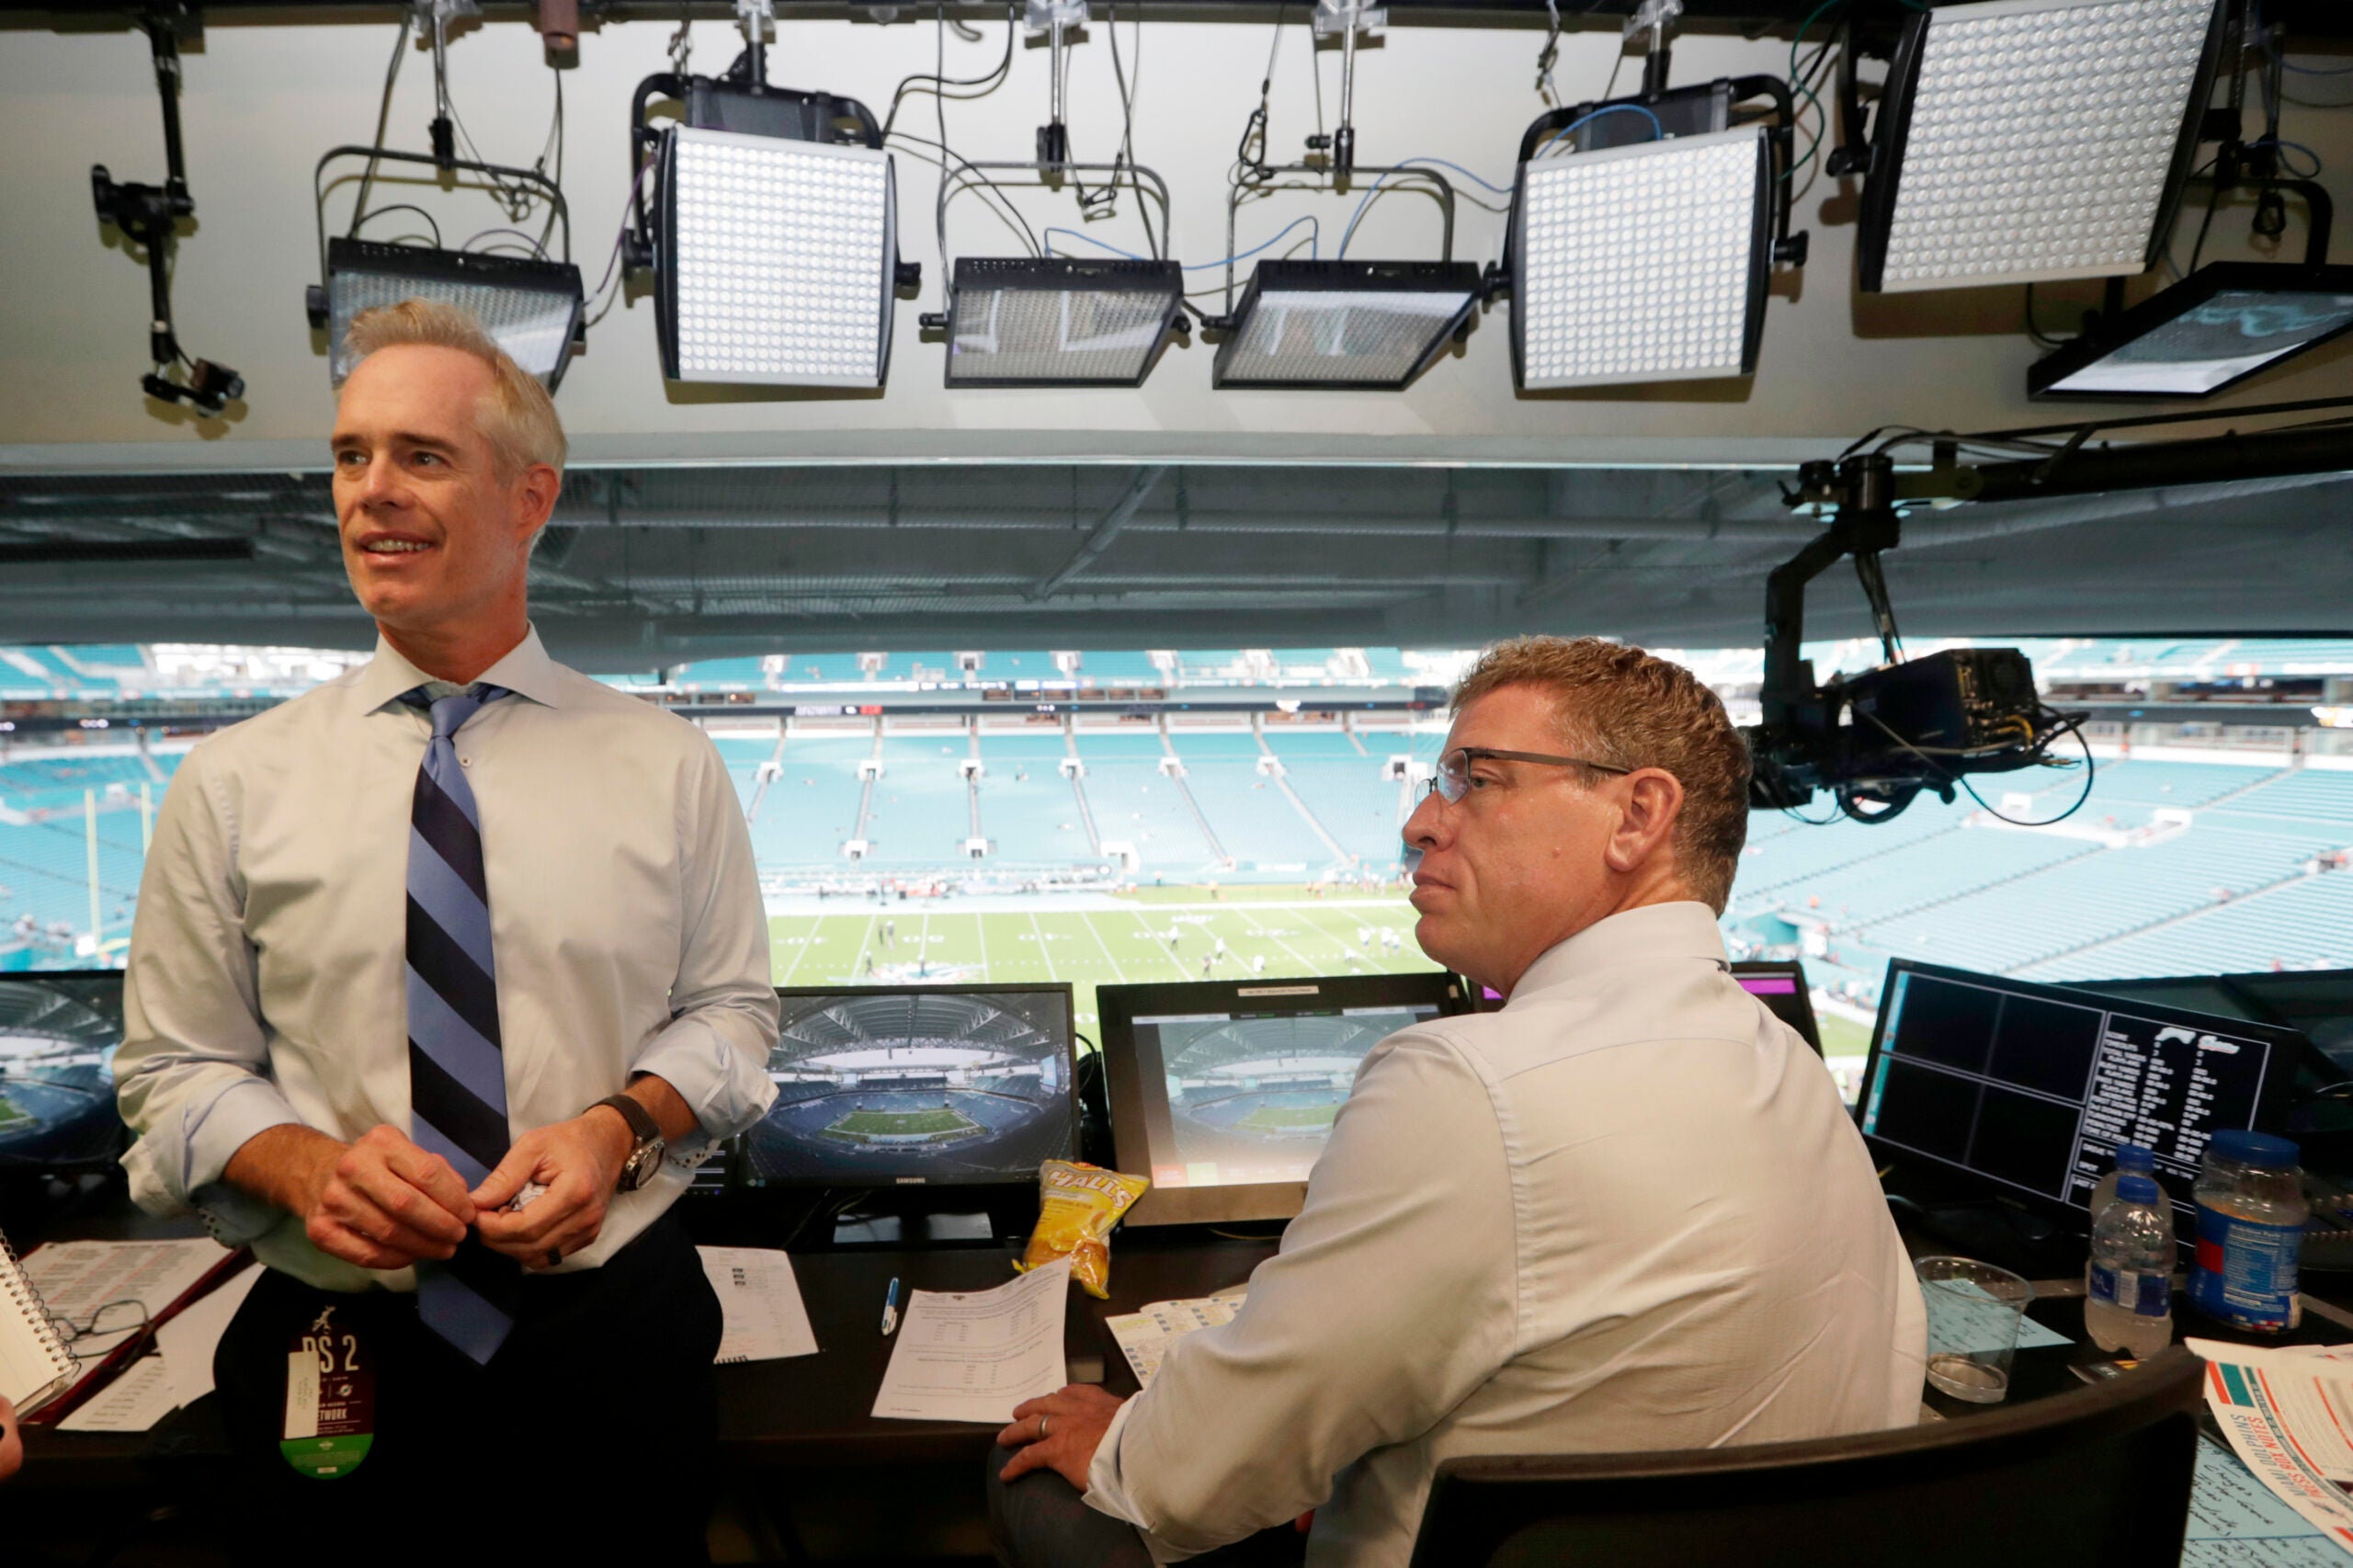 NFL Rights Deals: ESPN Retains Monday Night Football; ABC Joins Super Bowl  Rotation